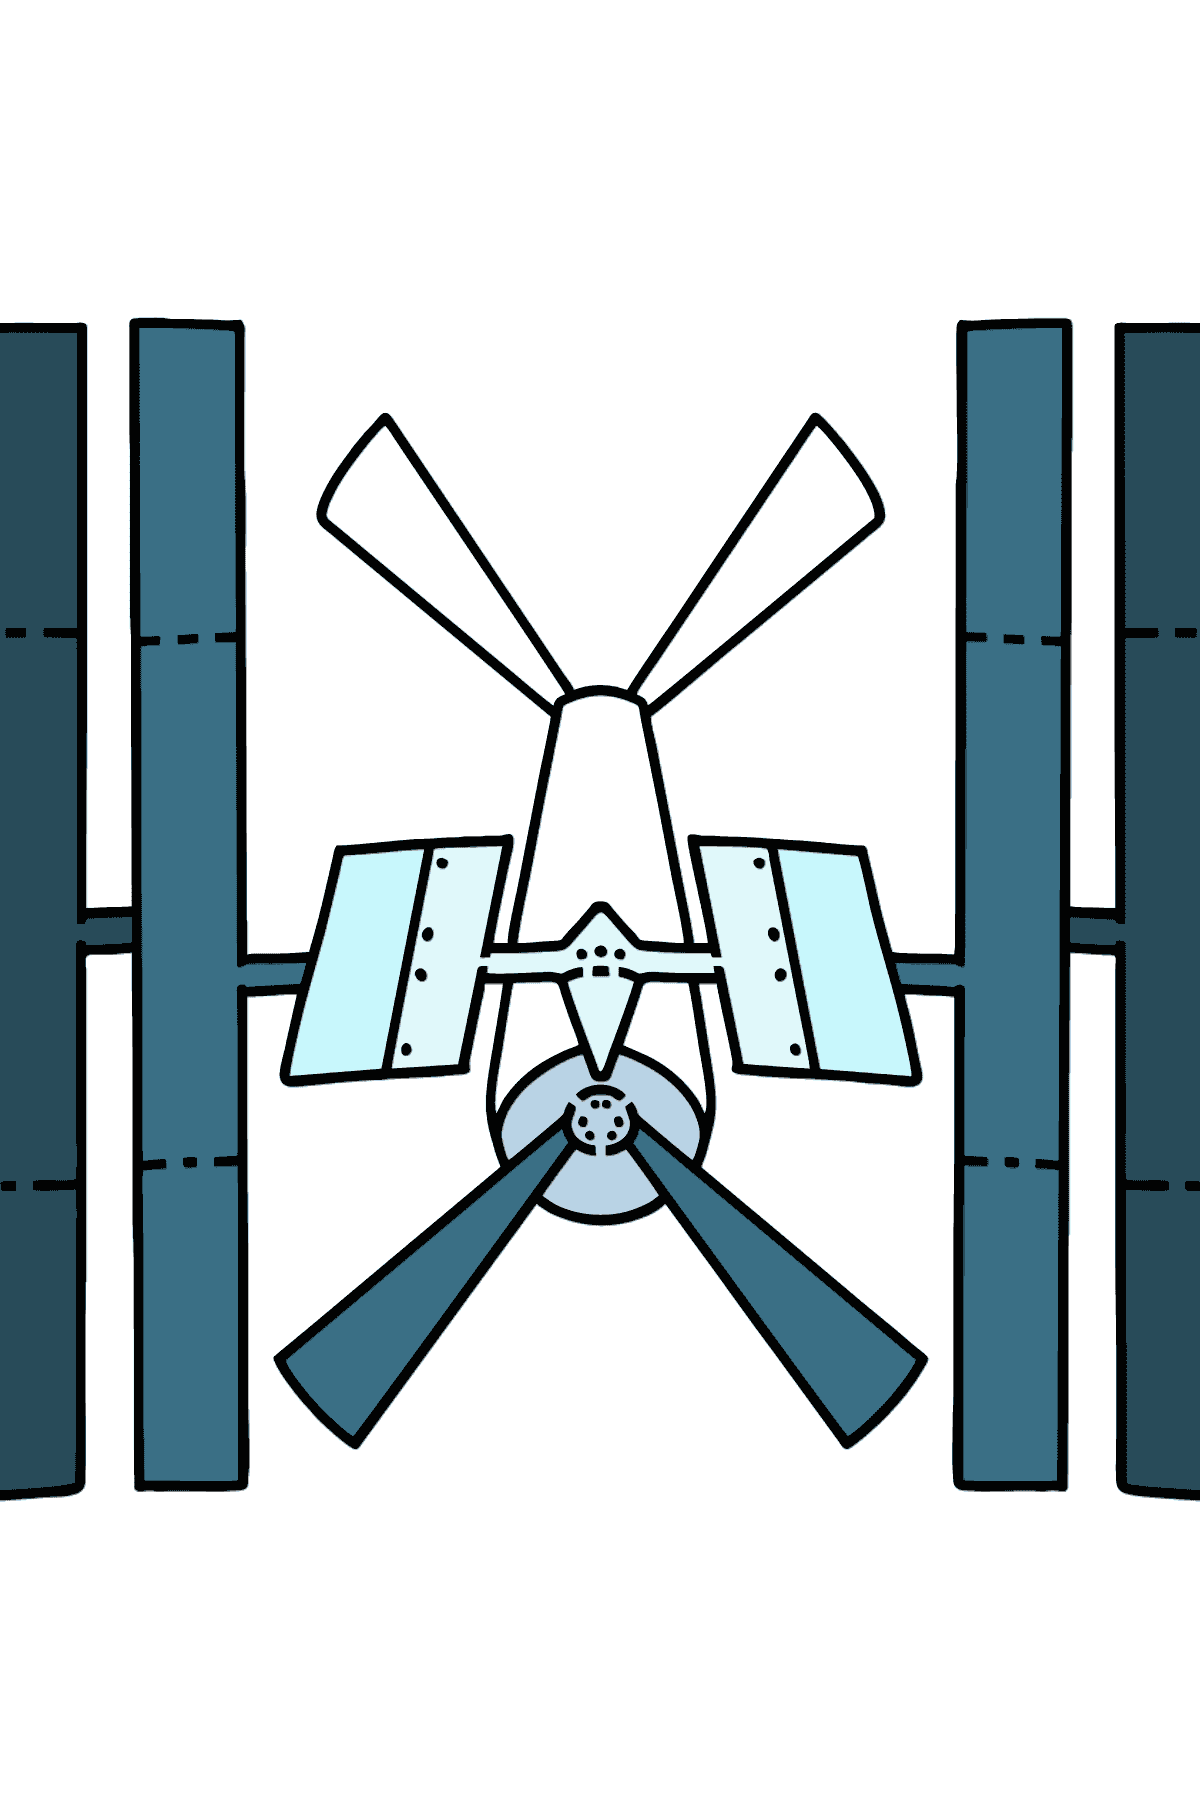 Space Station coloring page - Coloring Pages for Kids